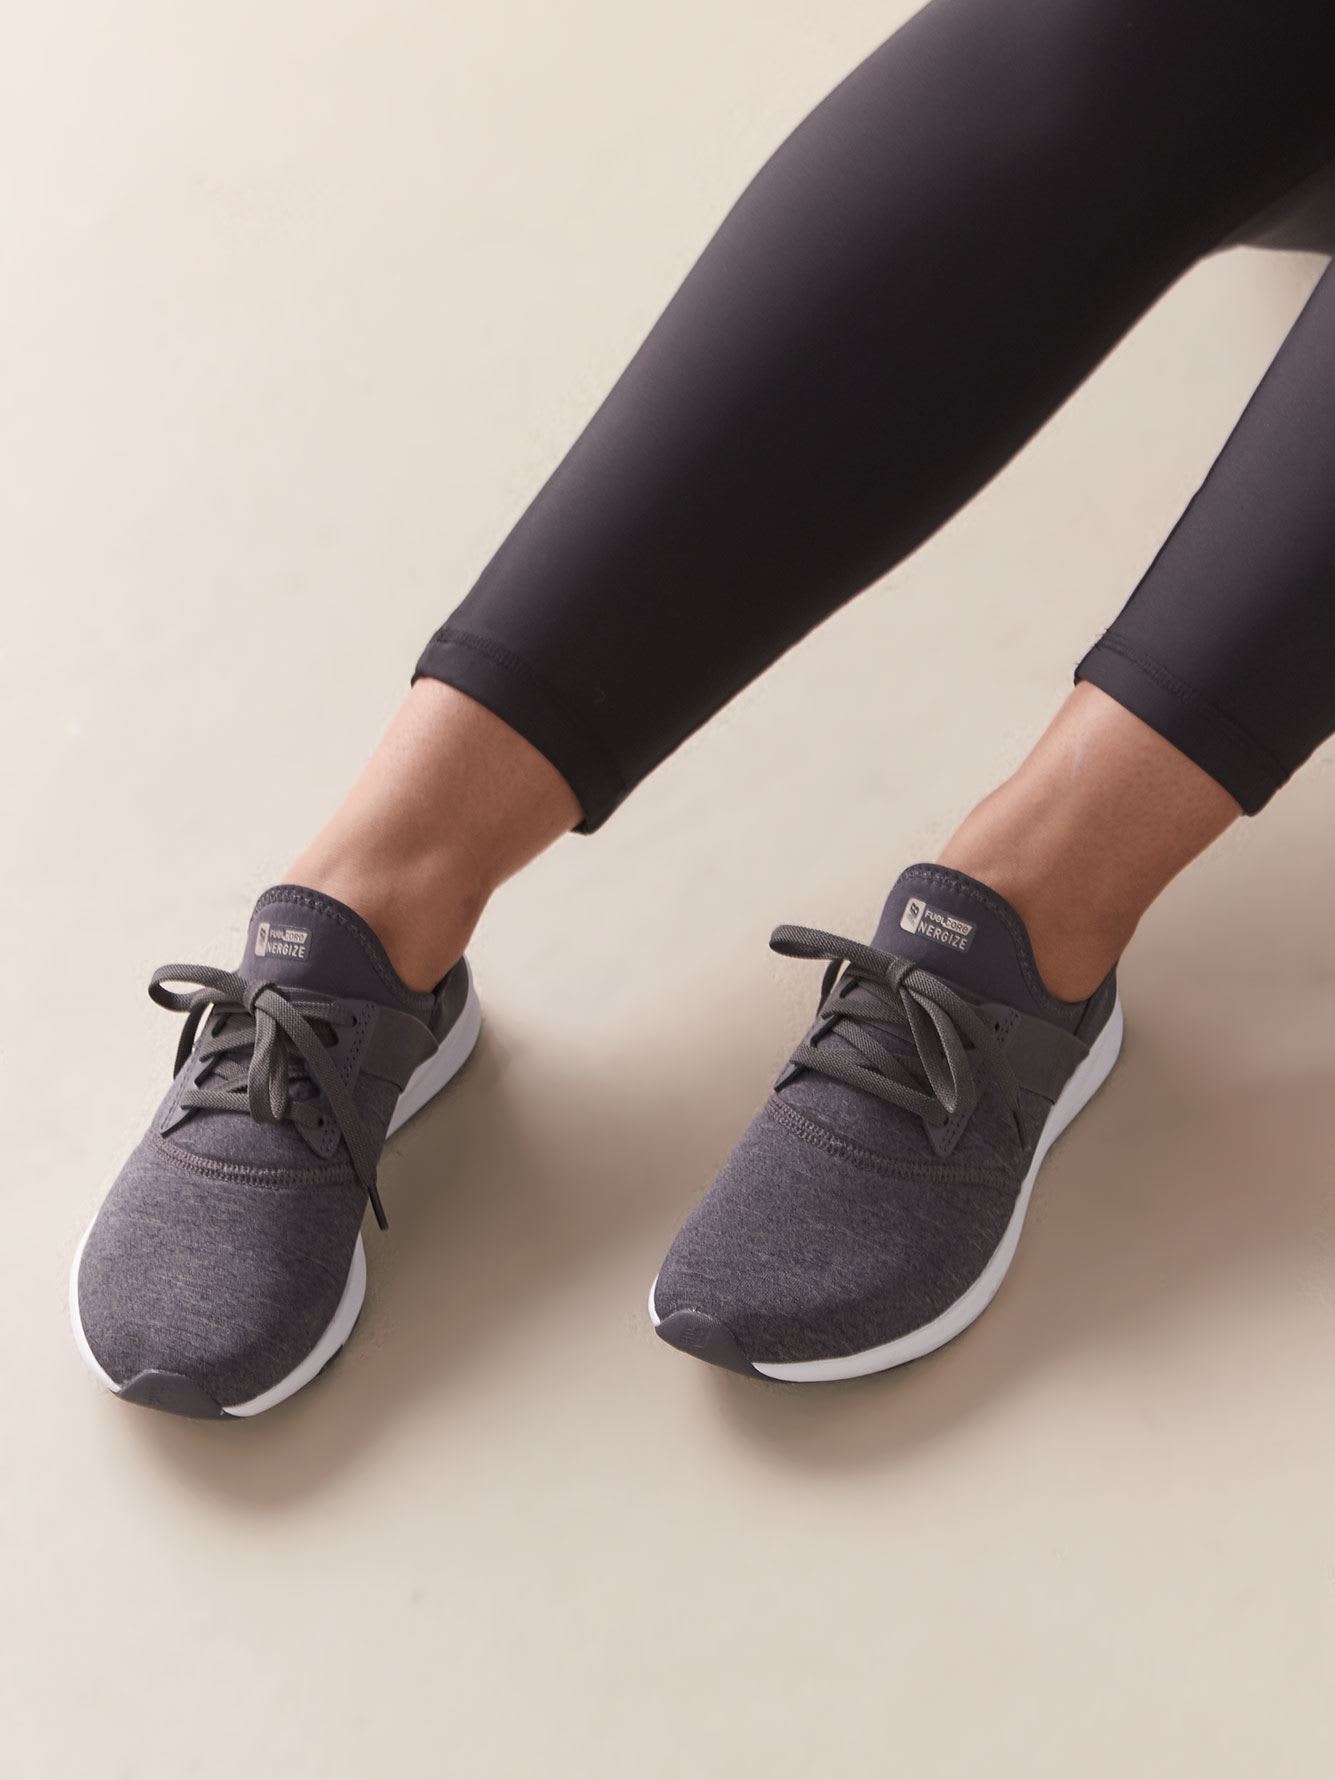 fuelcore nergize new balance review